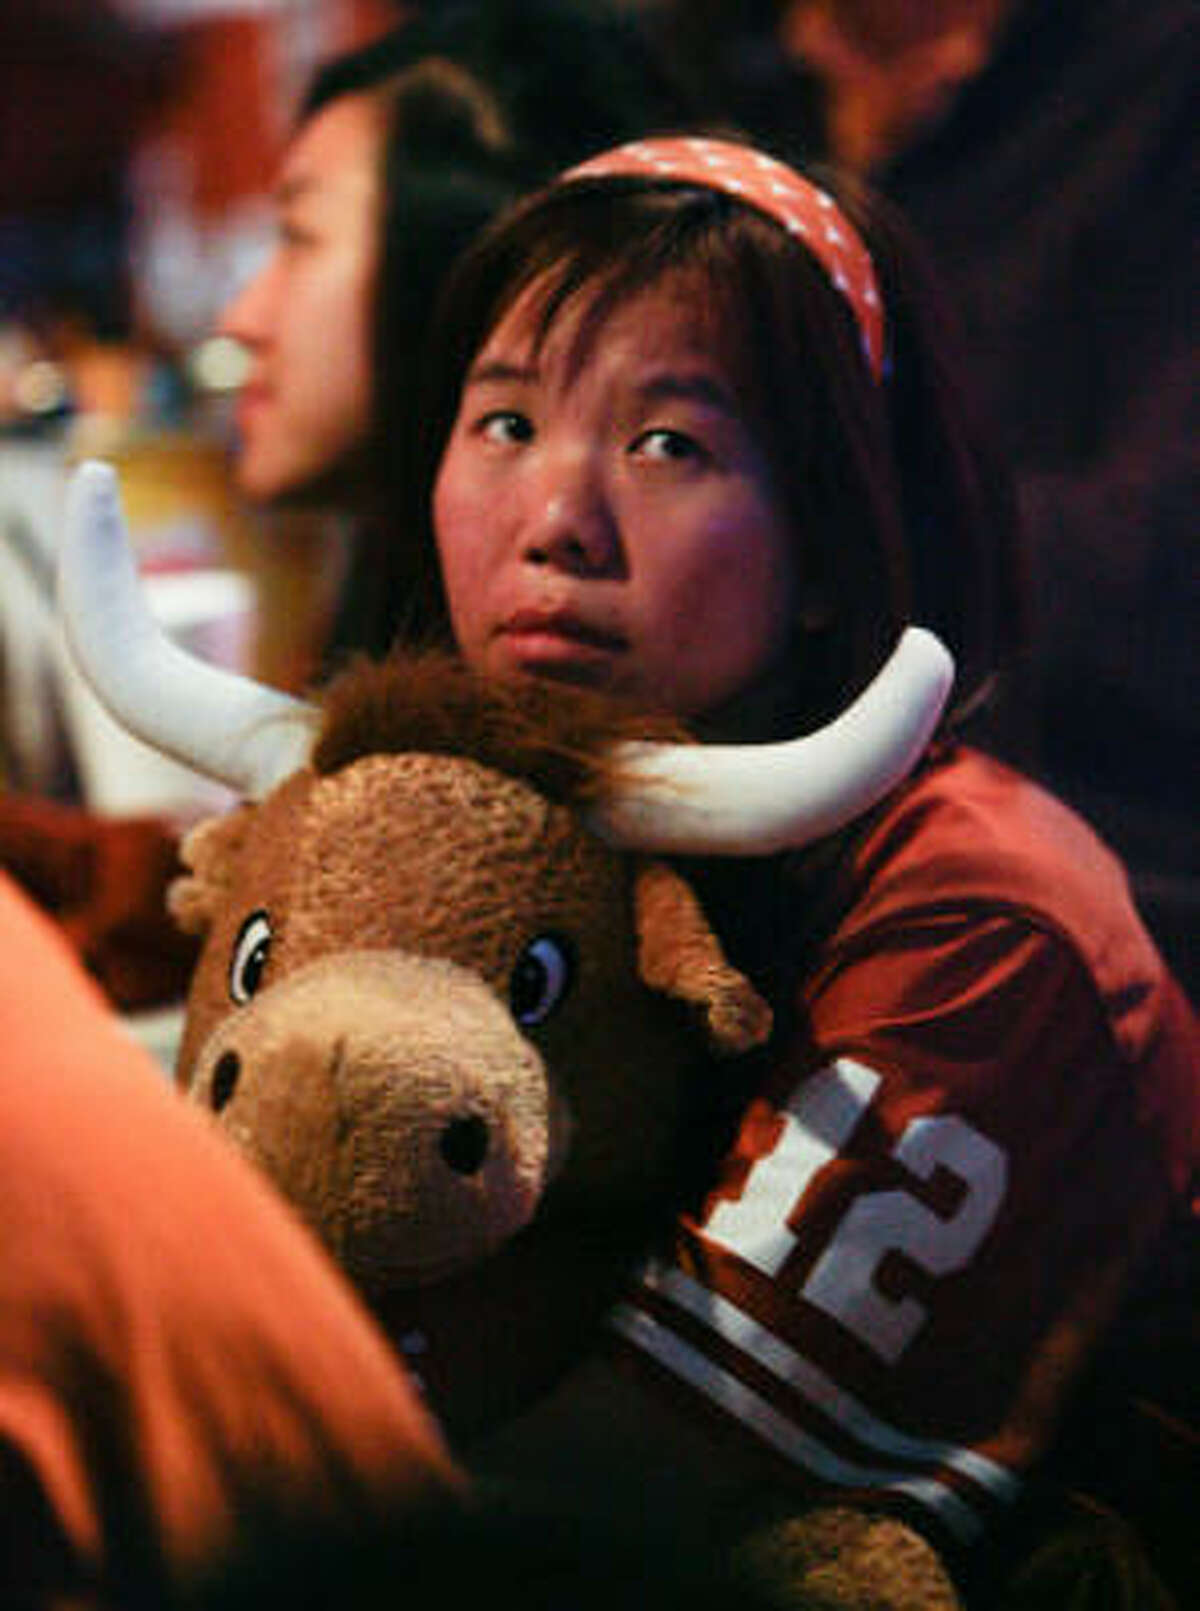 With Texas quarterback Colt McCoy out of the game, Vienna Lei sits upset while watching Thursday night's BCS title game between Texas and Alabama at a Texas Ex watch party at Lucky's Pub in Houston.